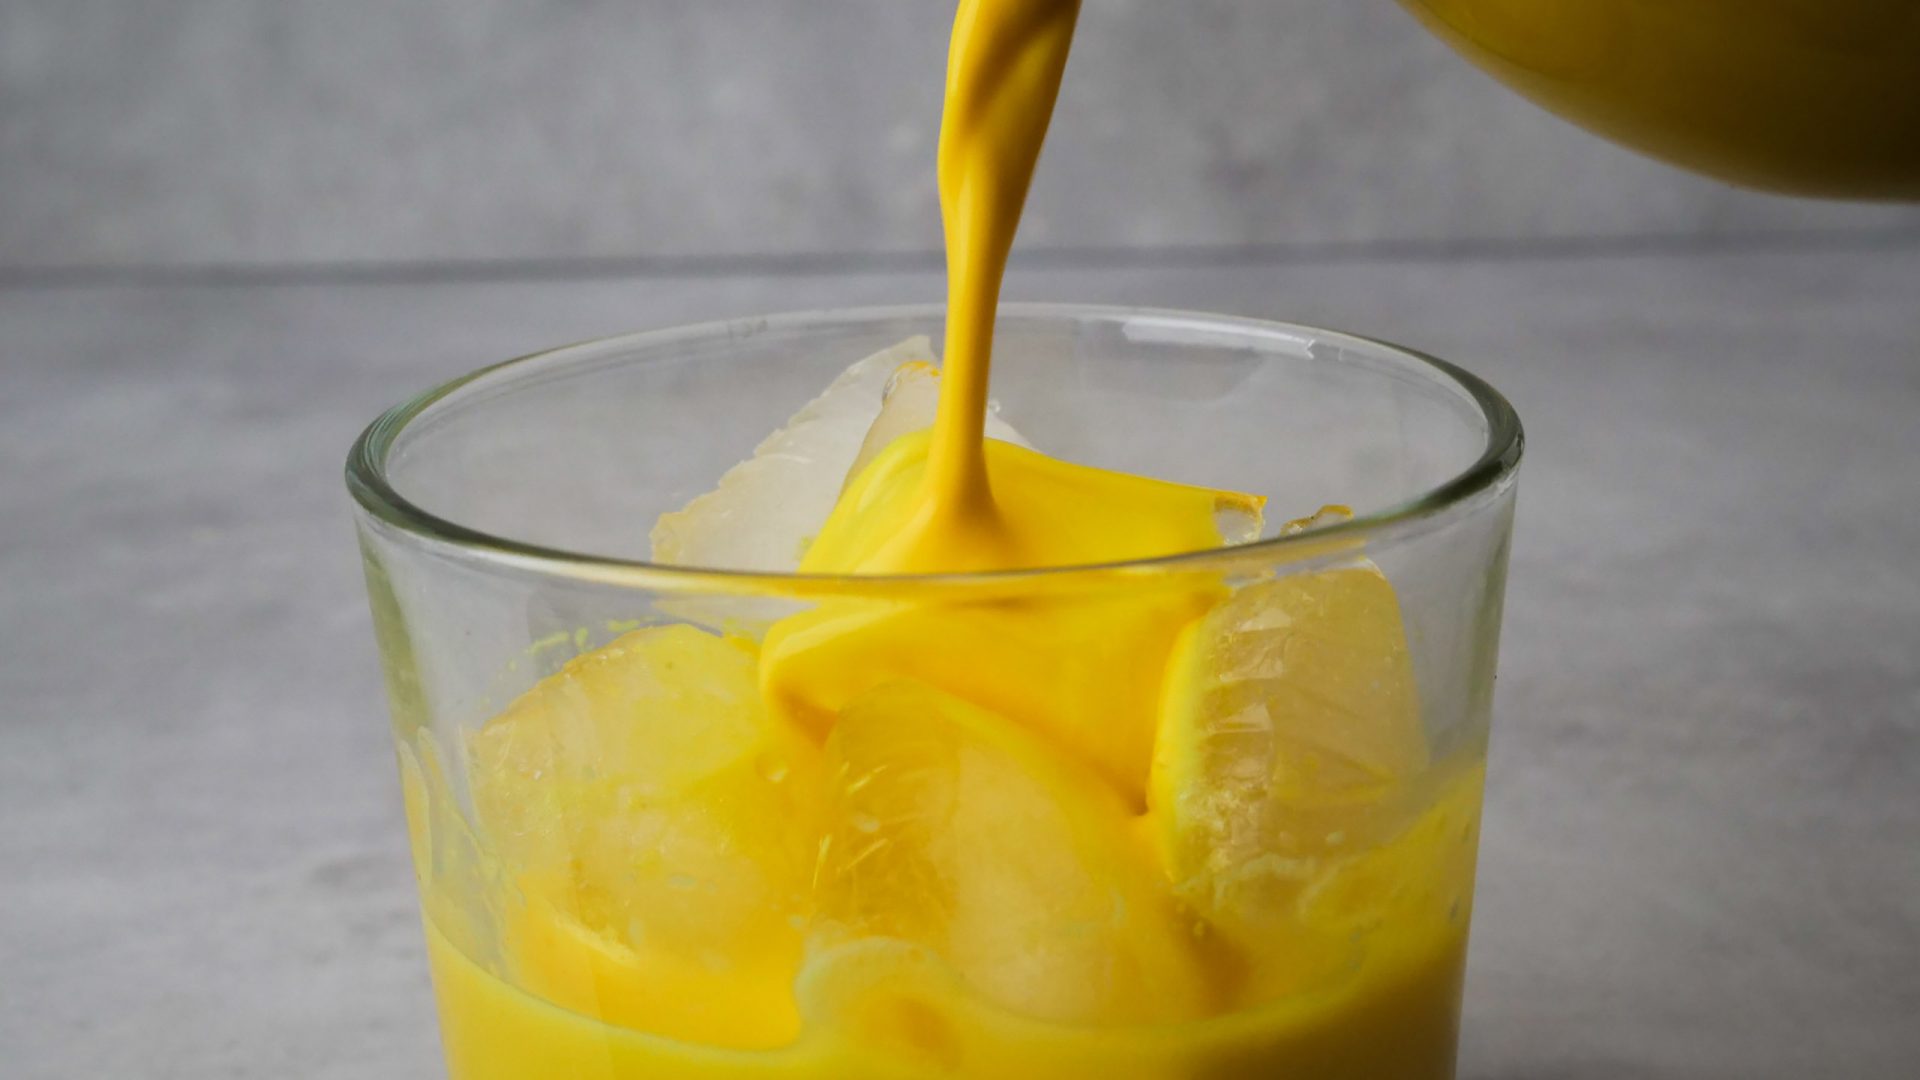 Golden Milk - The yellow-golden milk is poured into the glass over ice